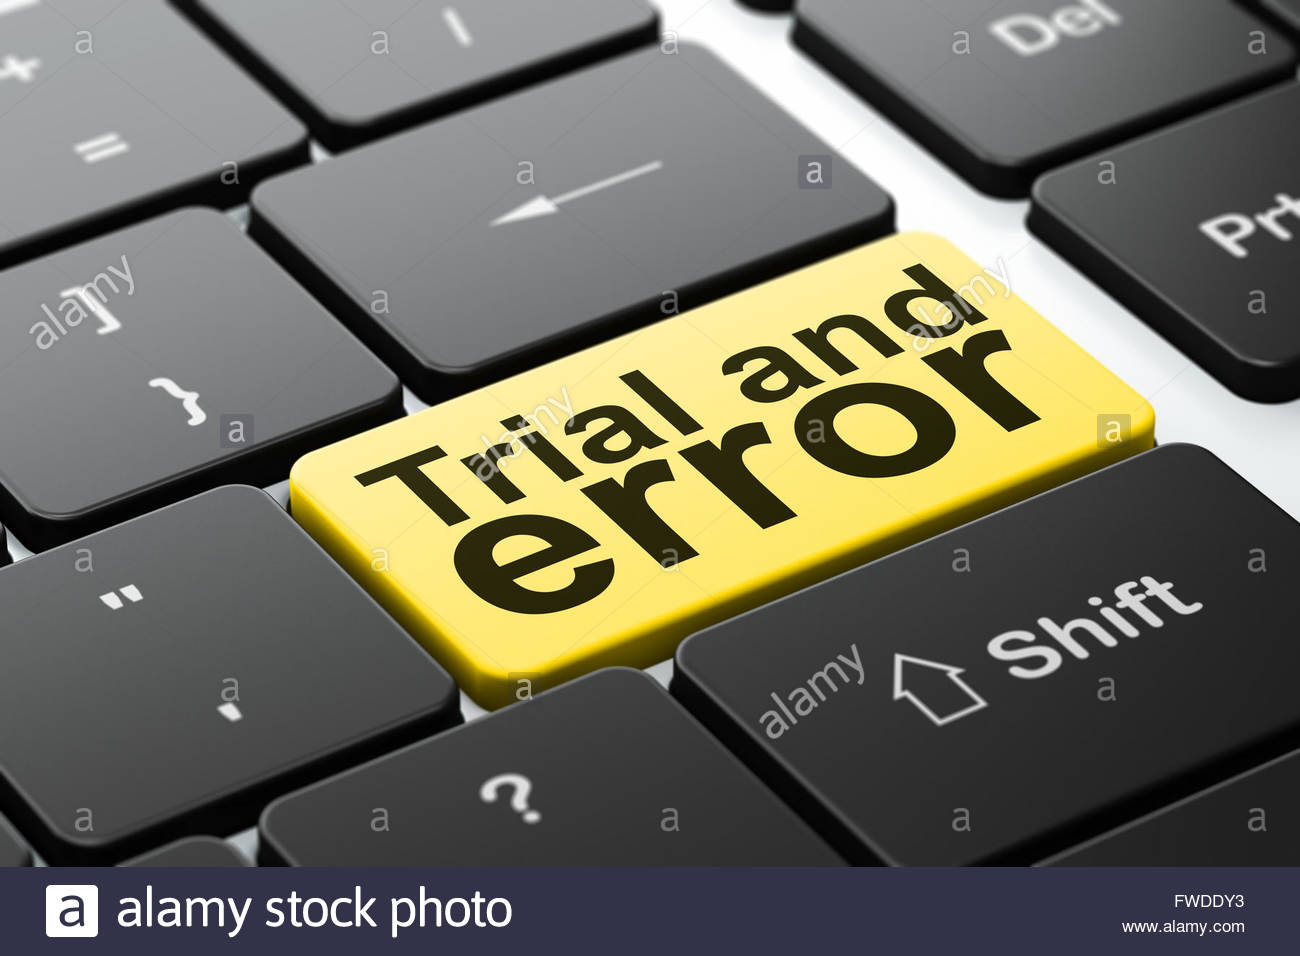 Trial Error Wallpapers Tv Show Hq Trial Error Pictures 4k Wallpapers 19